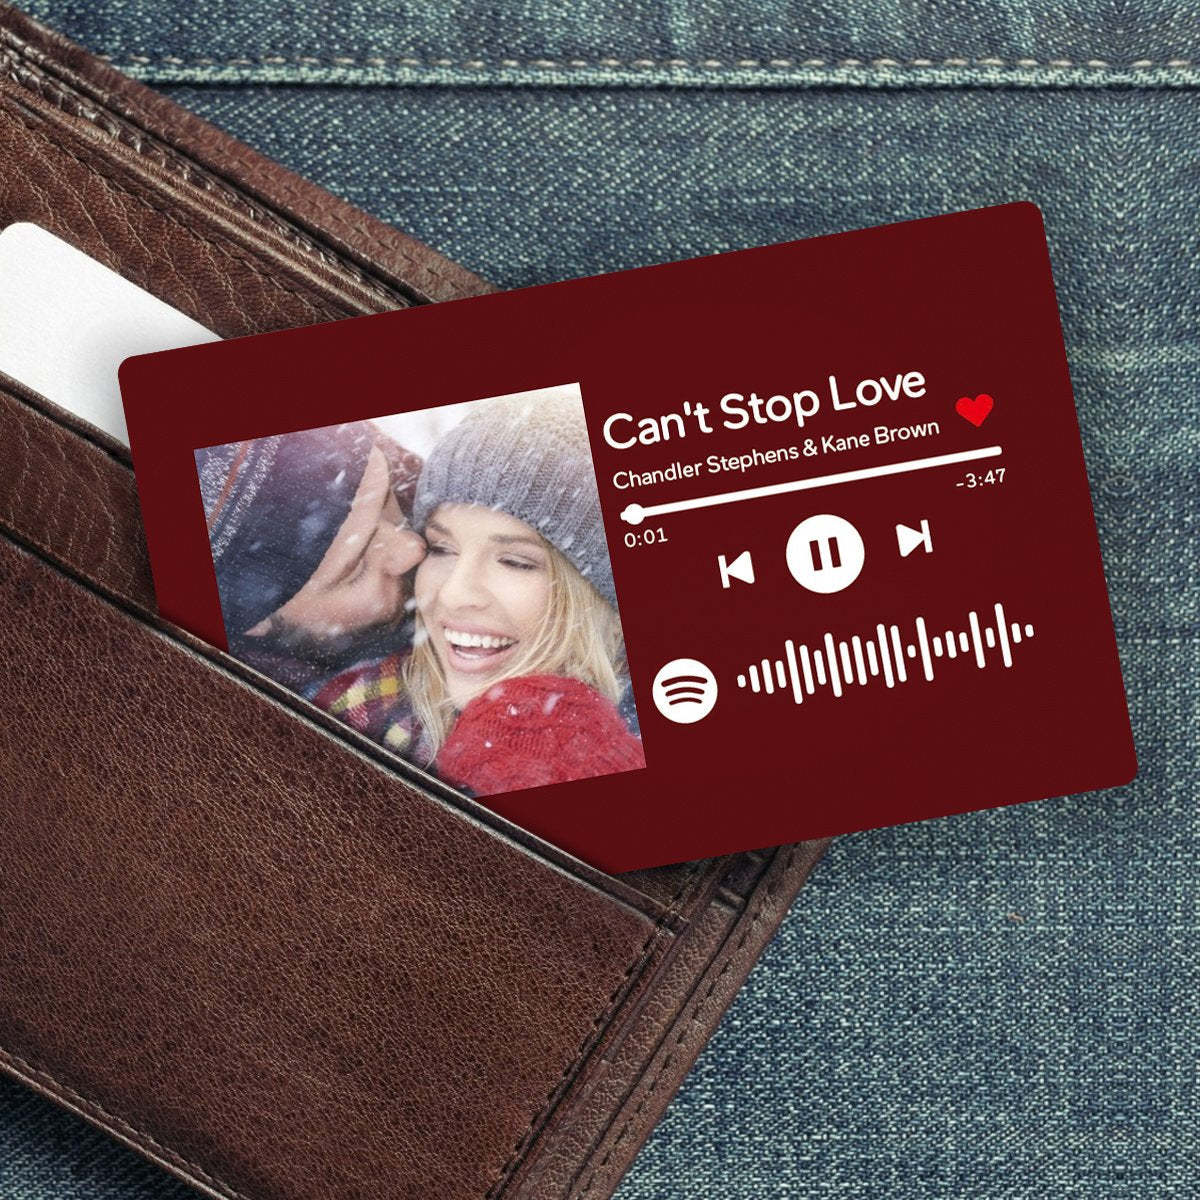 Scannable Spotify Code Photo Wallet Insert Card Gifts - 